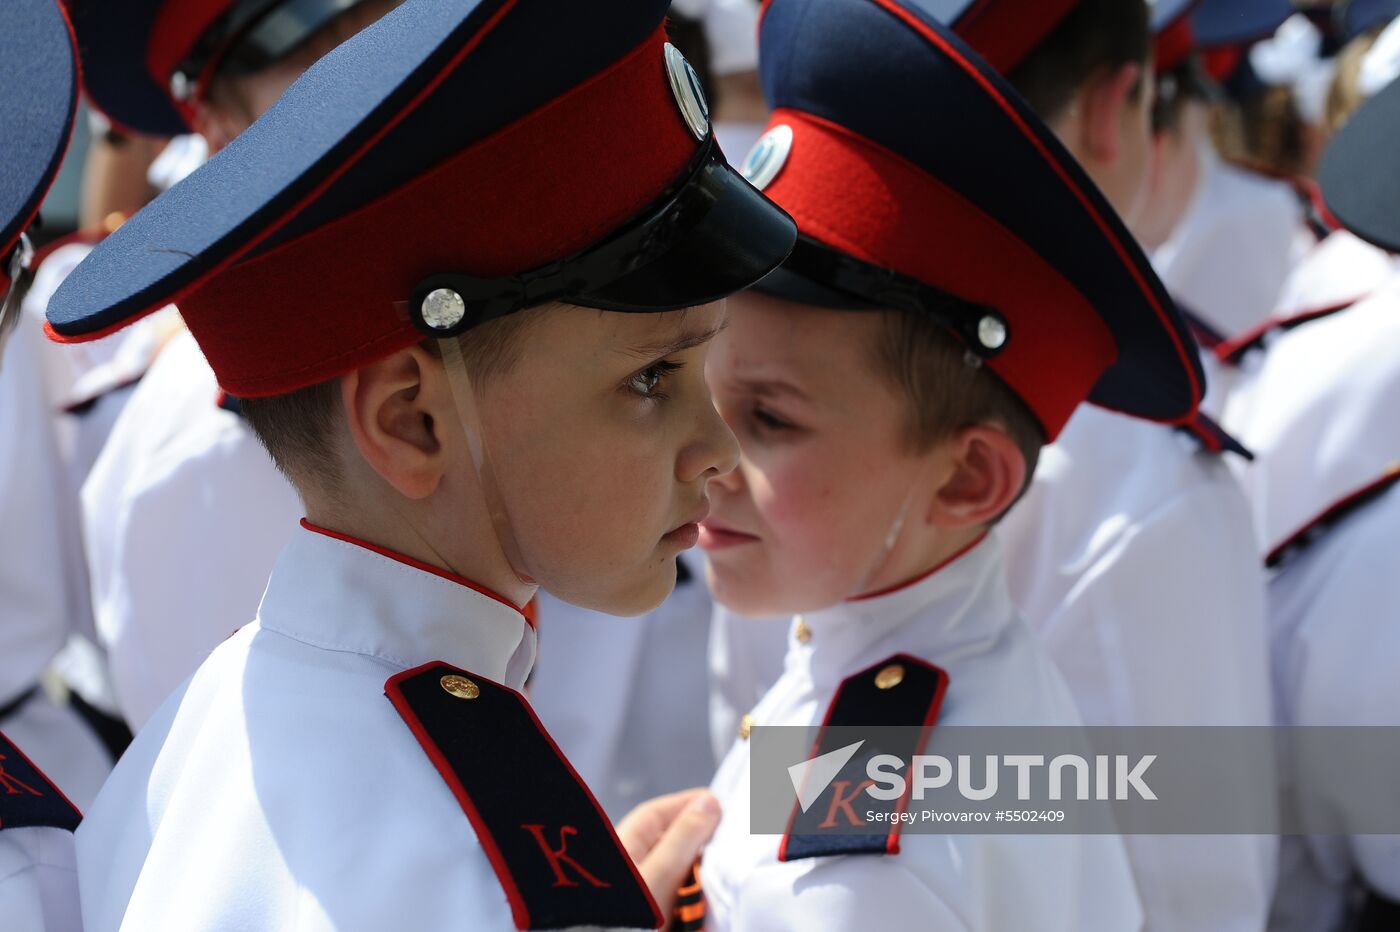 'Children's troops' parade in Rostov-on-Don